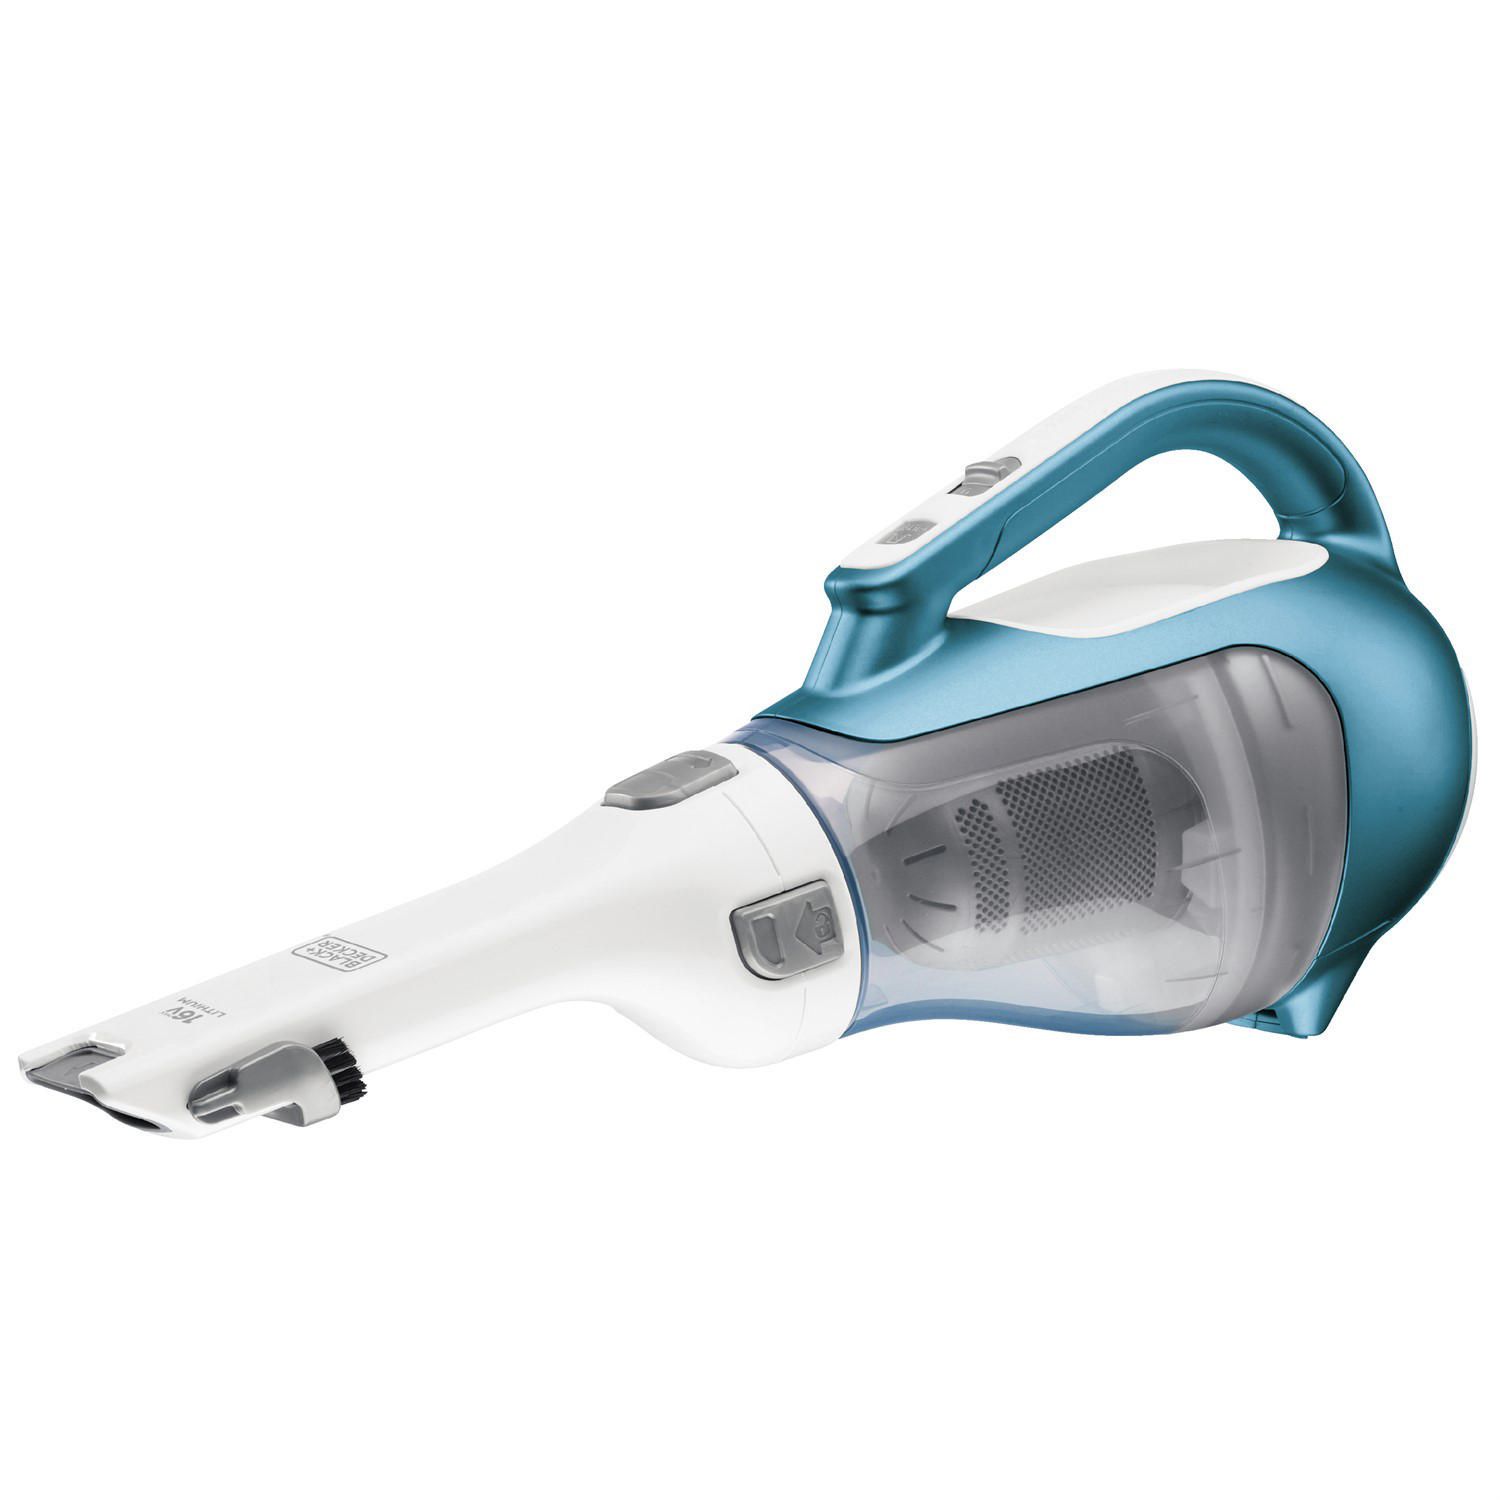 black and decker dust buster vacuum